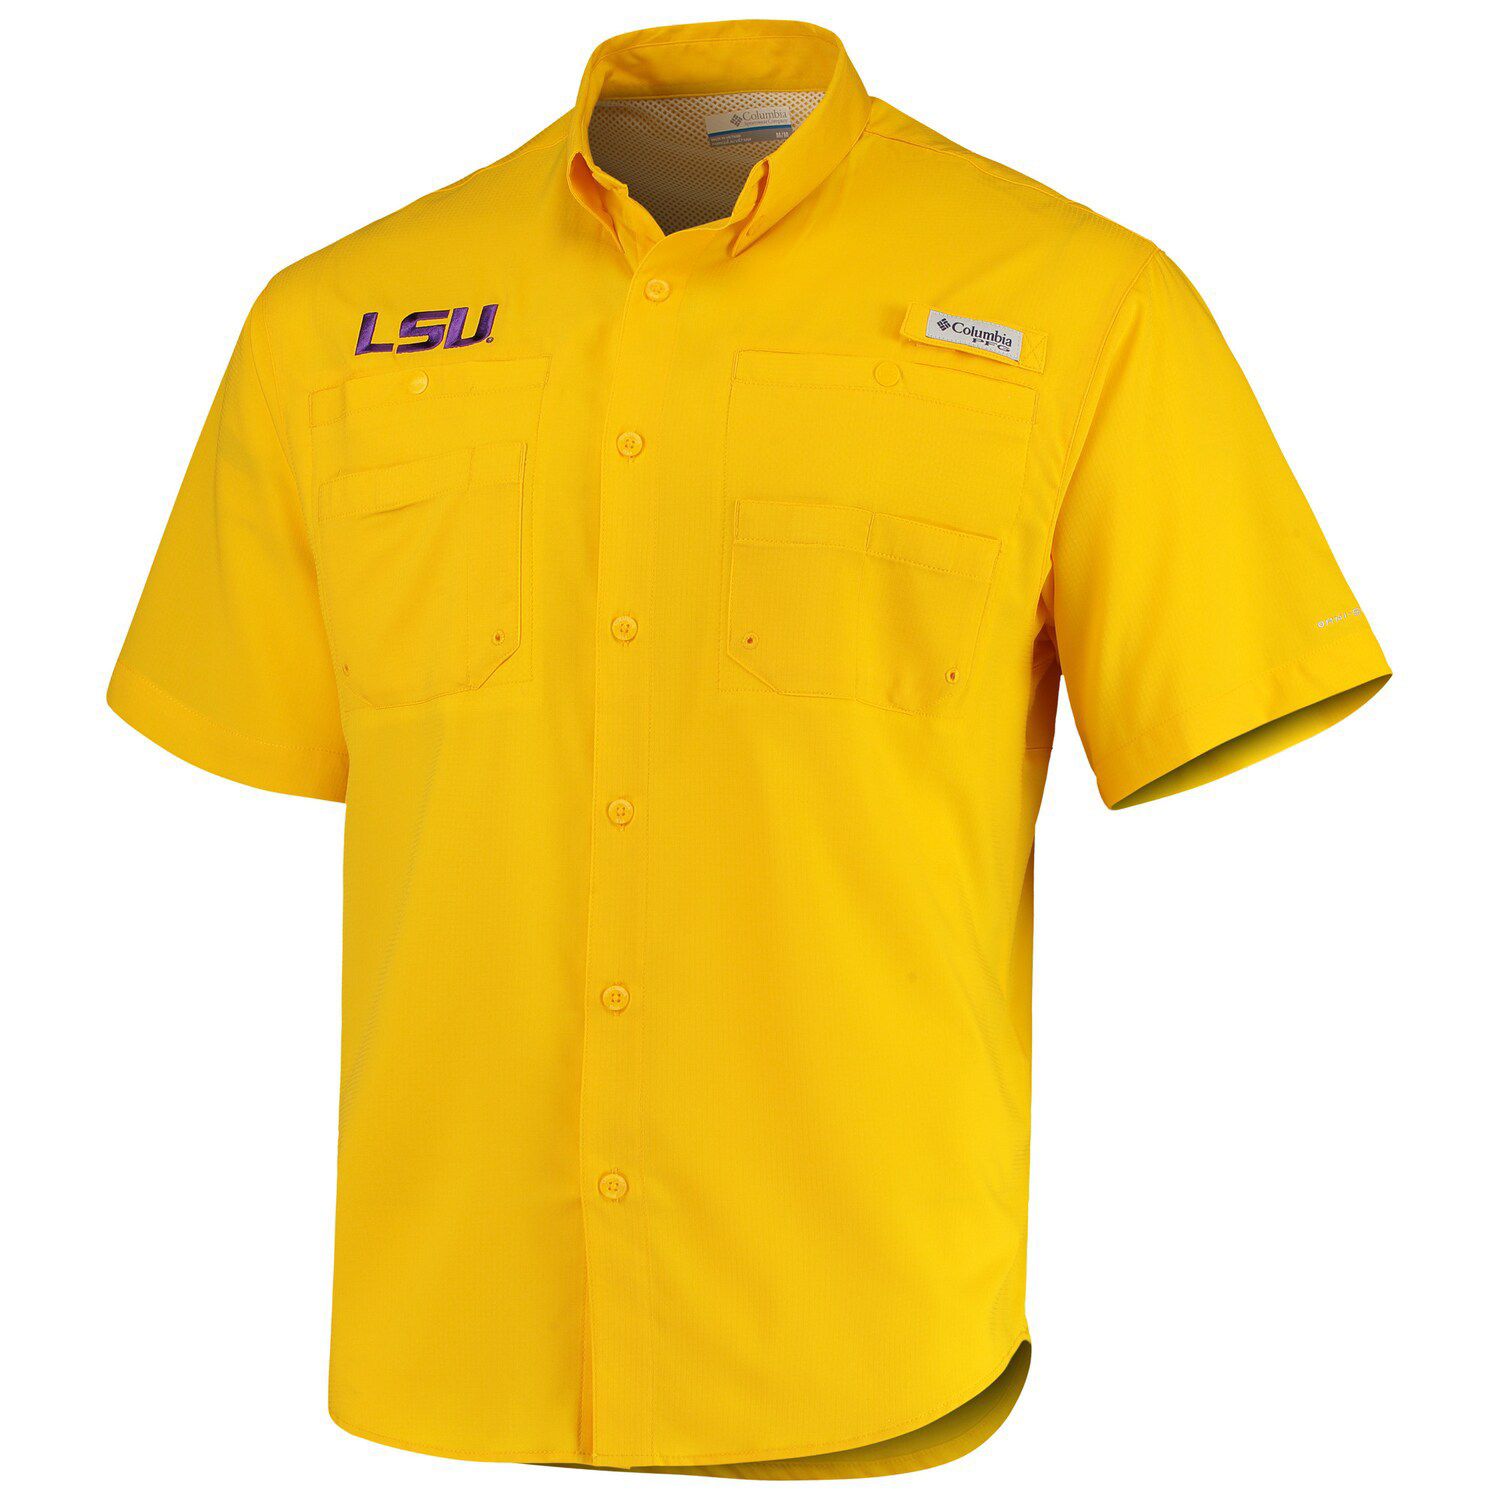 Image for Unbranded Men's Columbia Yellow LSU Tigers PFG Tamiami Shirt at Kohl's.